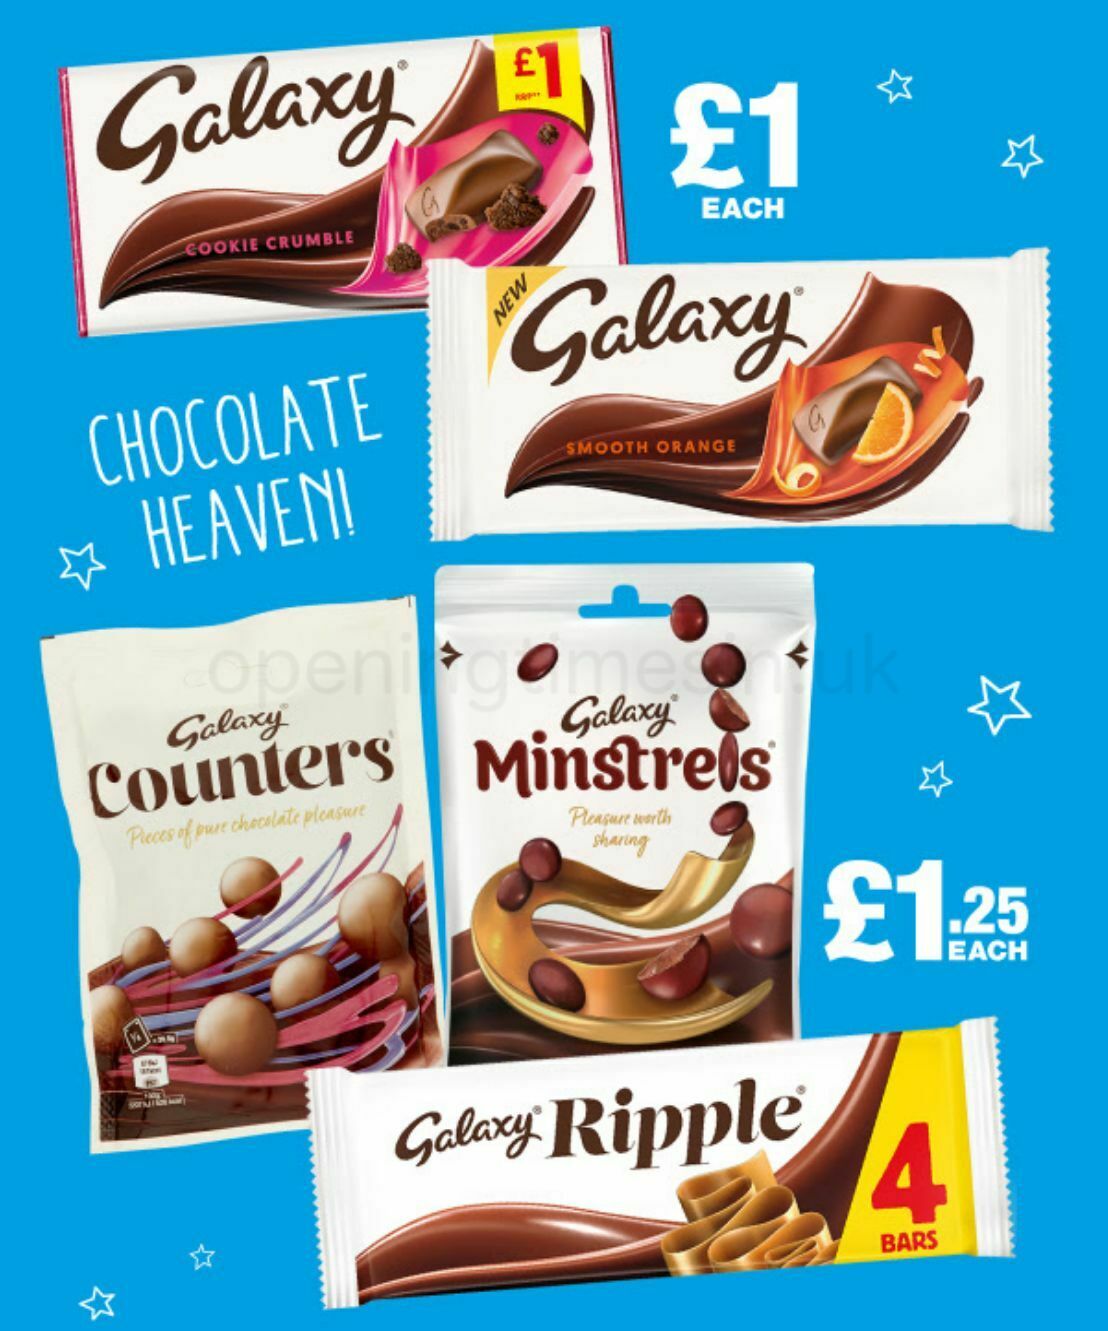 Poundland NEW in sweet treats Offers from 29 July